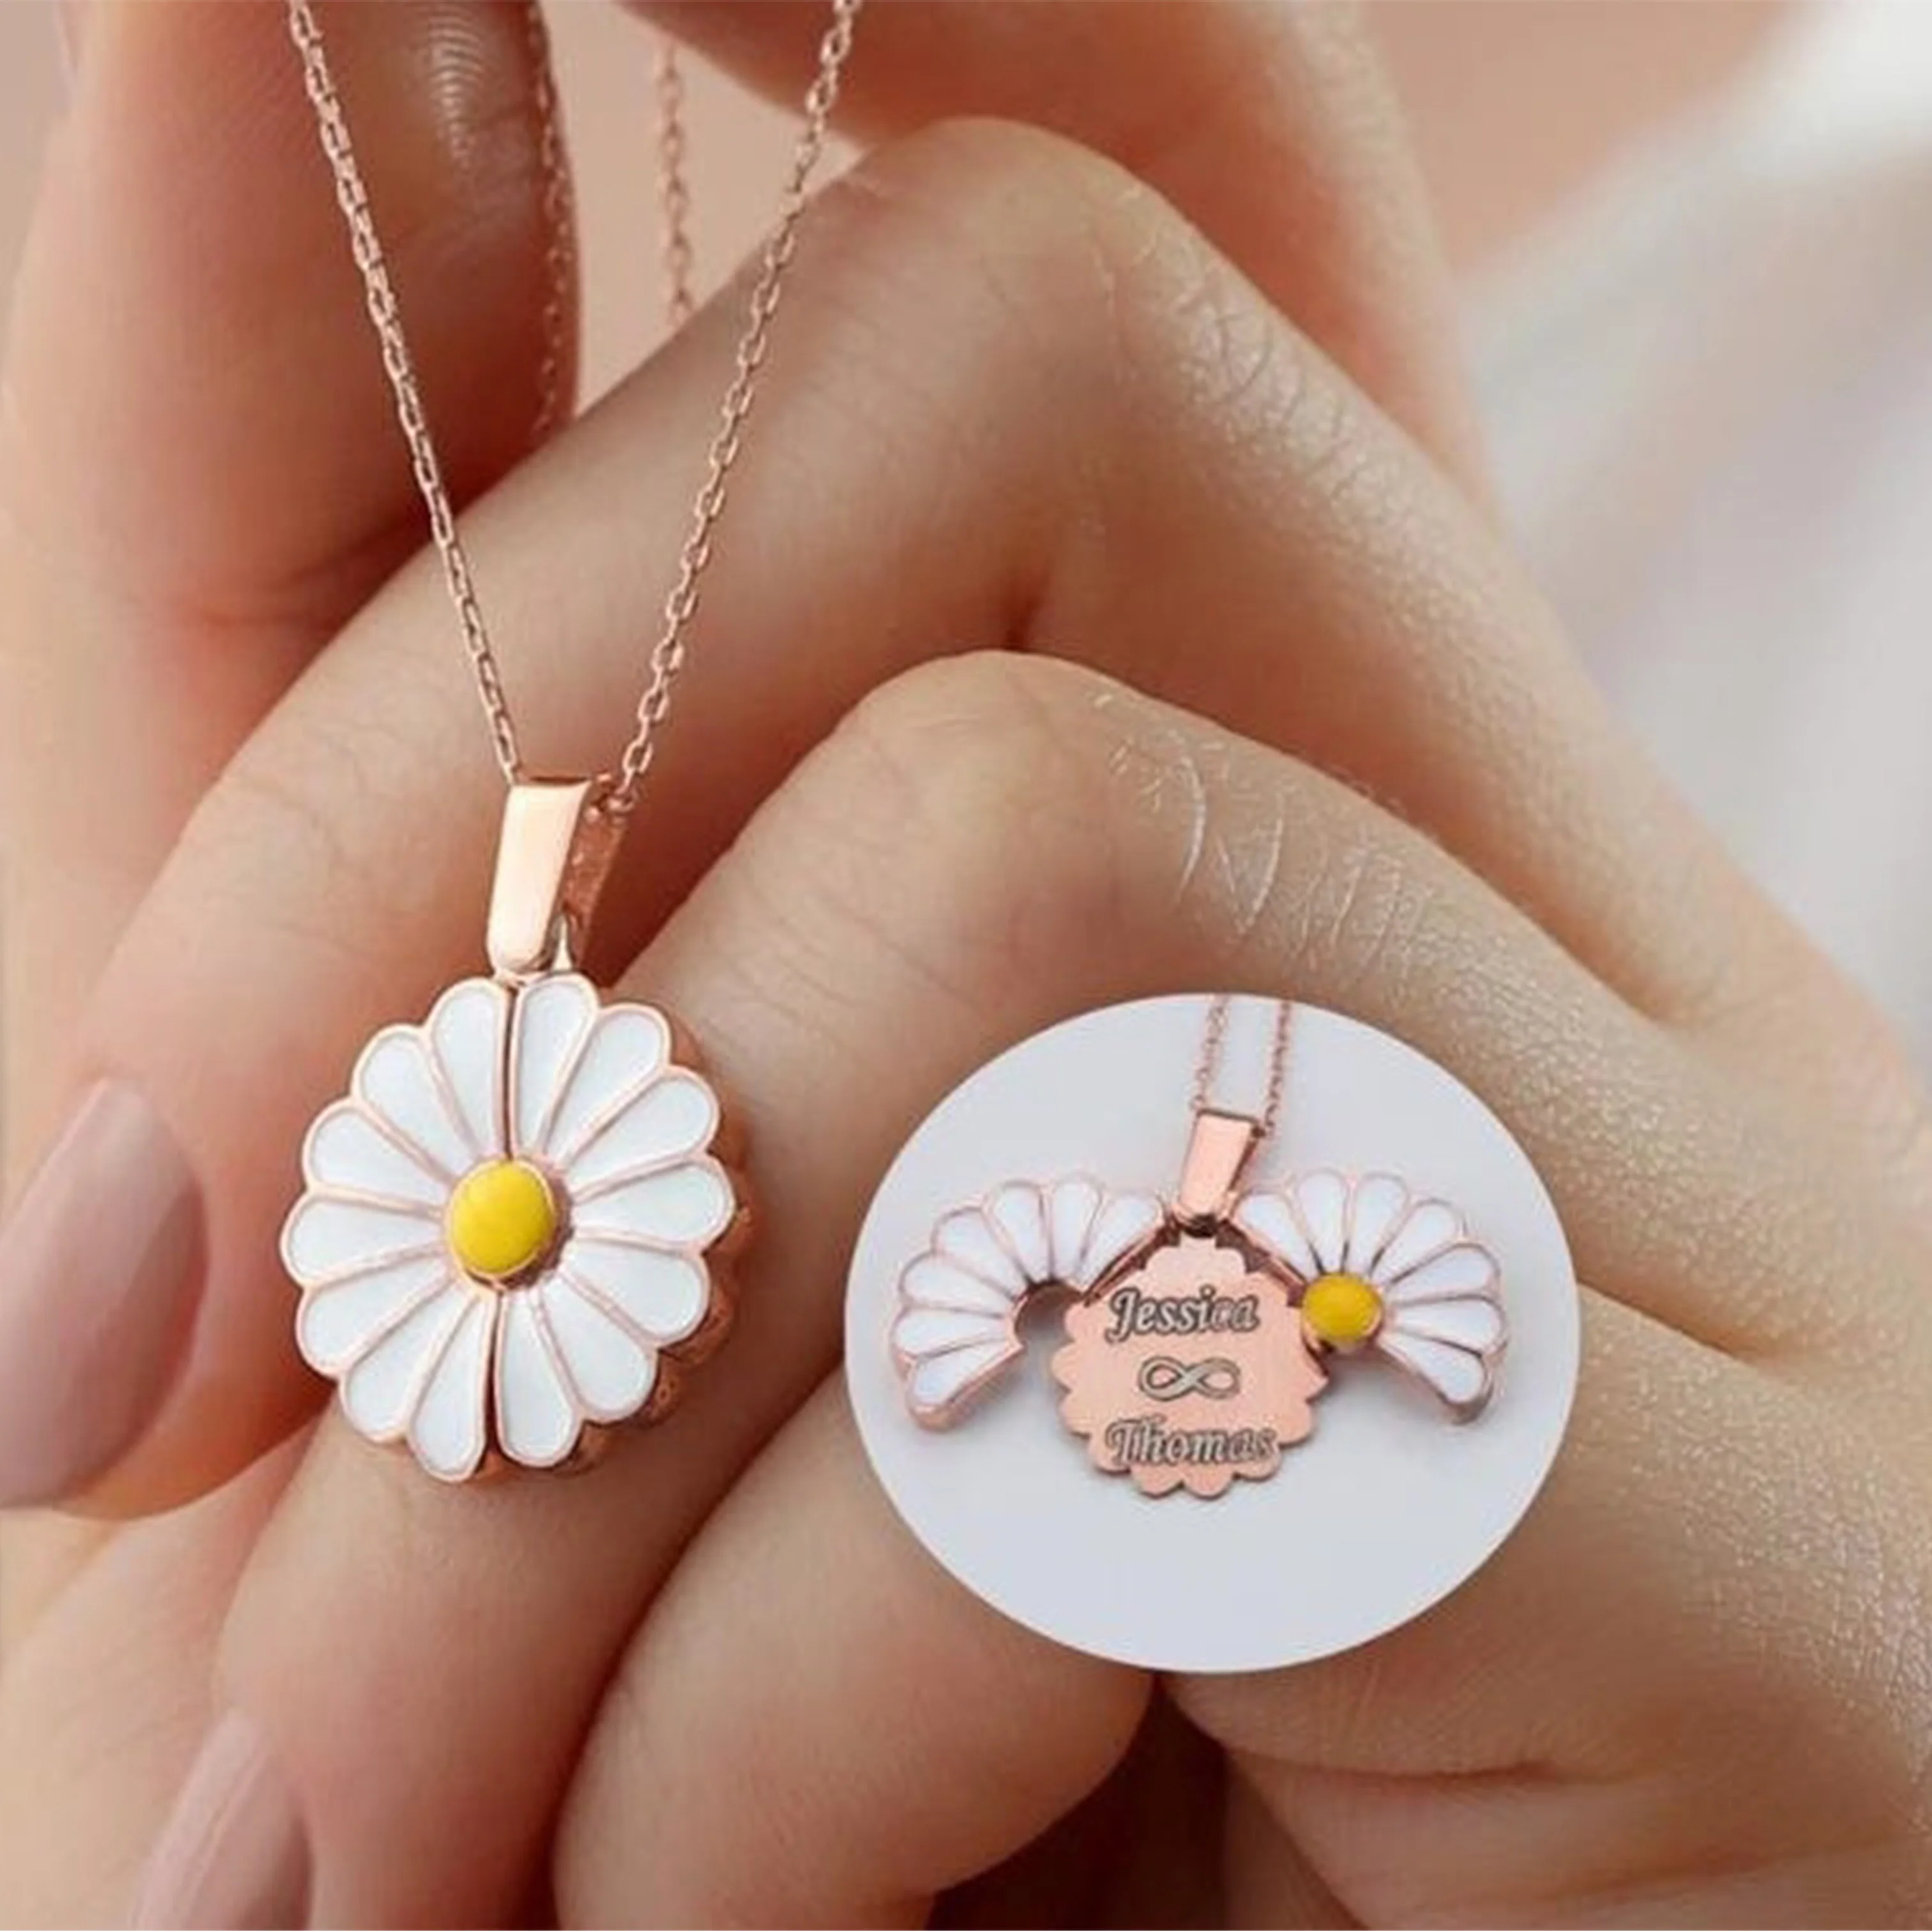 Personalized Daisy Name Necklace For Women Customized Engraved Birth Flower Pendant Daisy Jewelry Best Friend Gift